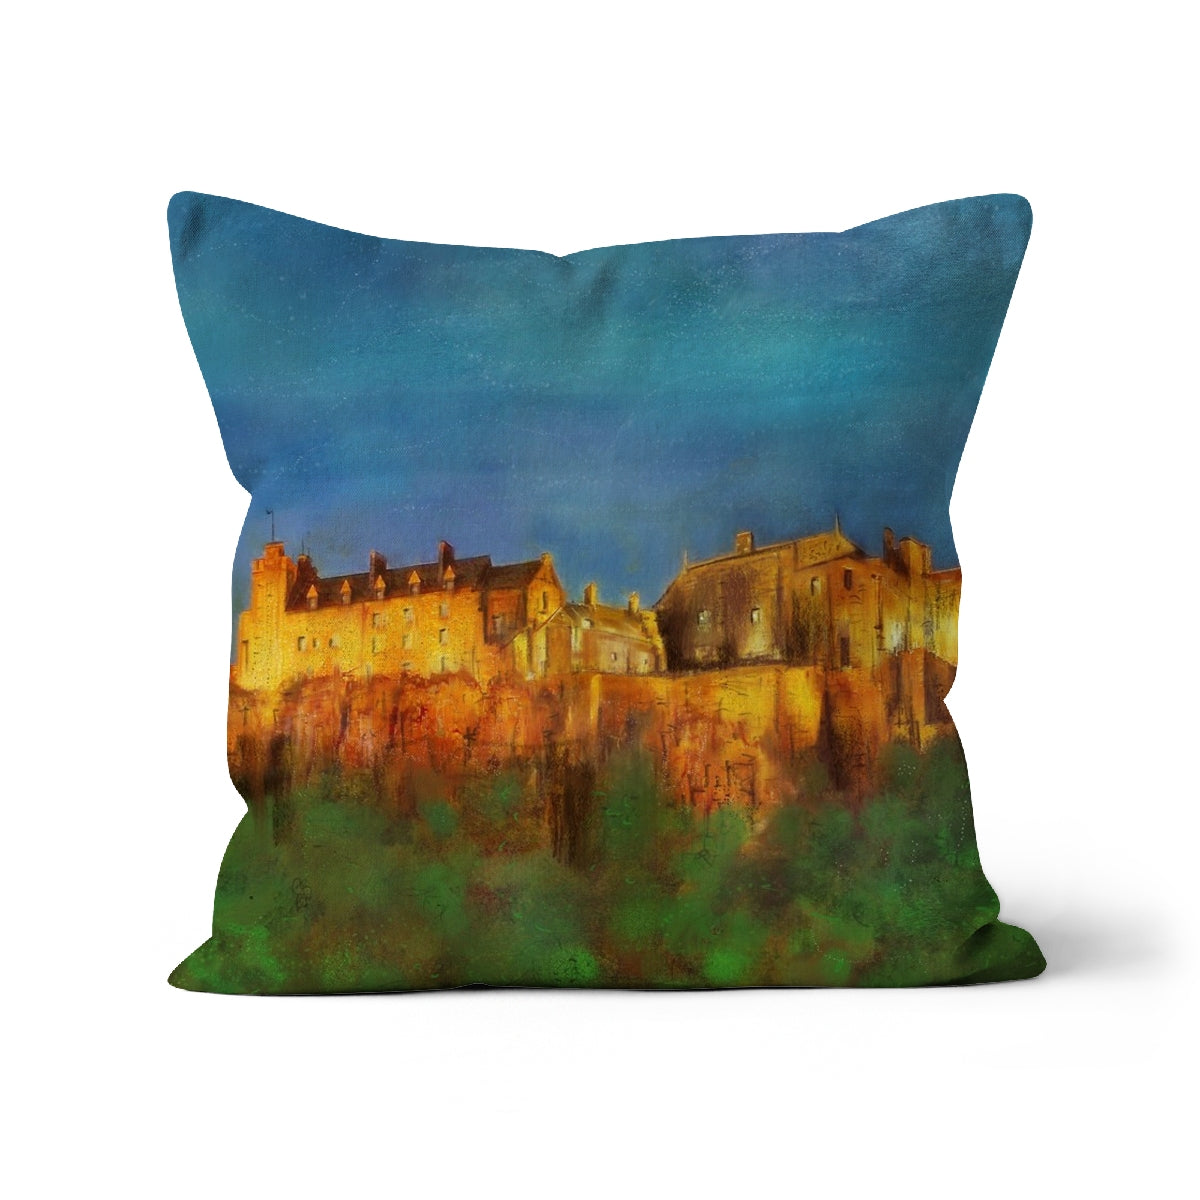 Stirling Castle Art Gifts Cushion-Cushions-Historic & Iconic Scotland Art Gallery-Faux Suede-16"x16"-Paintings, Prints, Homeware, Art Gifts From Scotland By Scottish Artist Kevin Hunter